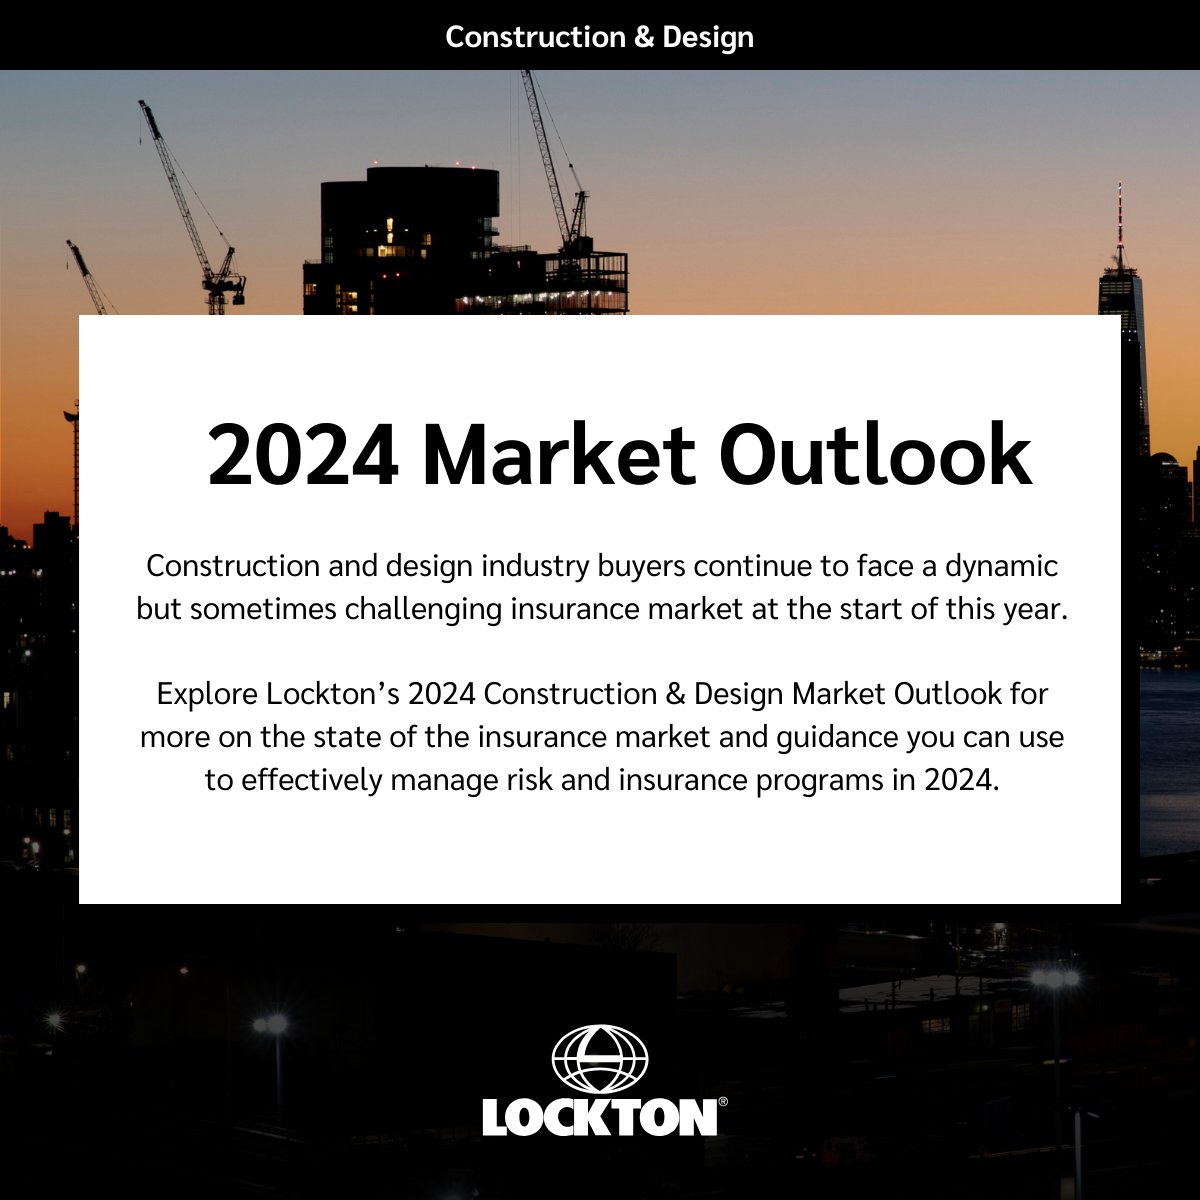 Lockton’s 2024 Construction & Design Market Outlook is here! Learn more about the construction and design insurance market and guidance on how you can effectively manage risk and insurance programs in the year ahead. global.lockton.com/us/en/news-ins…